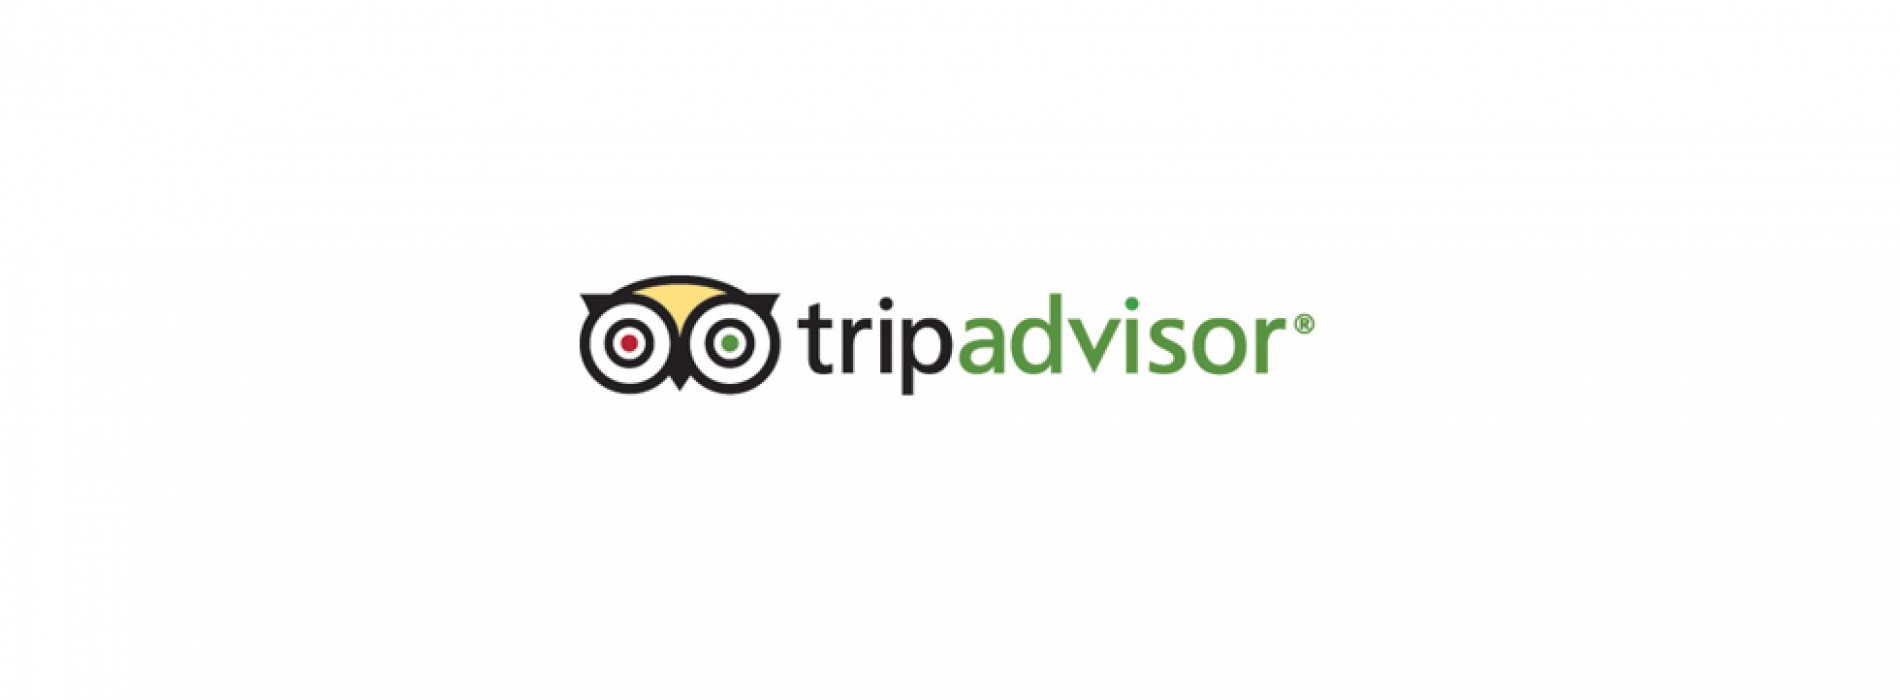 Chat with new TripAdvisor Facebook Messenger Bot to get great travel recommendations for your next Trip or Stay-cation